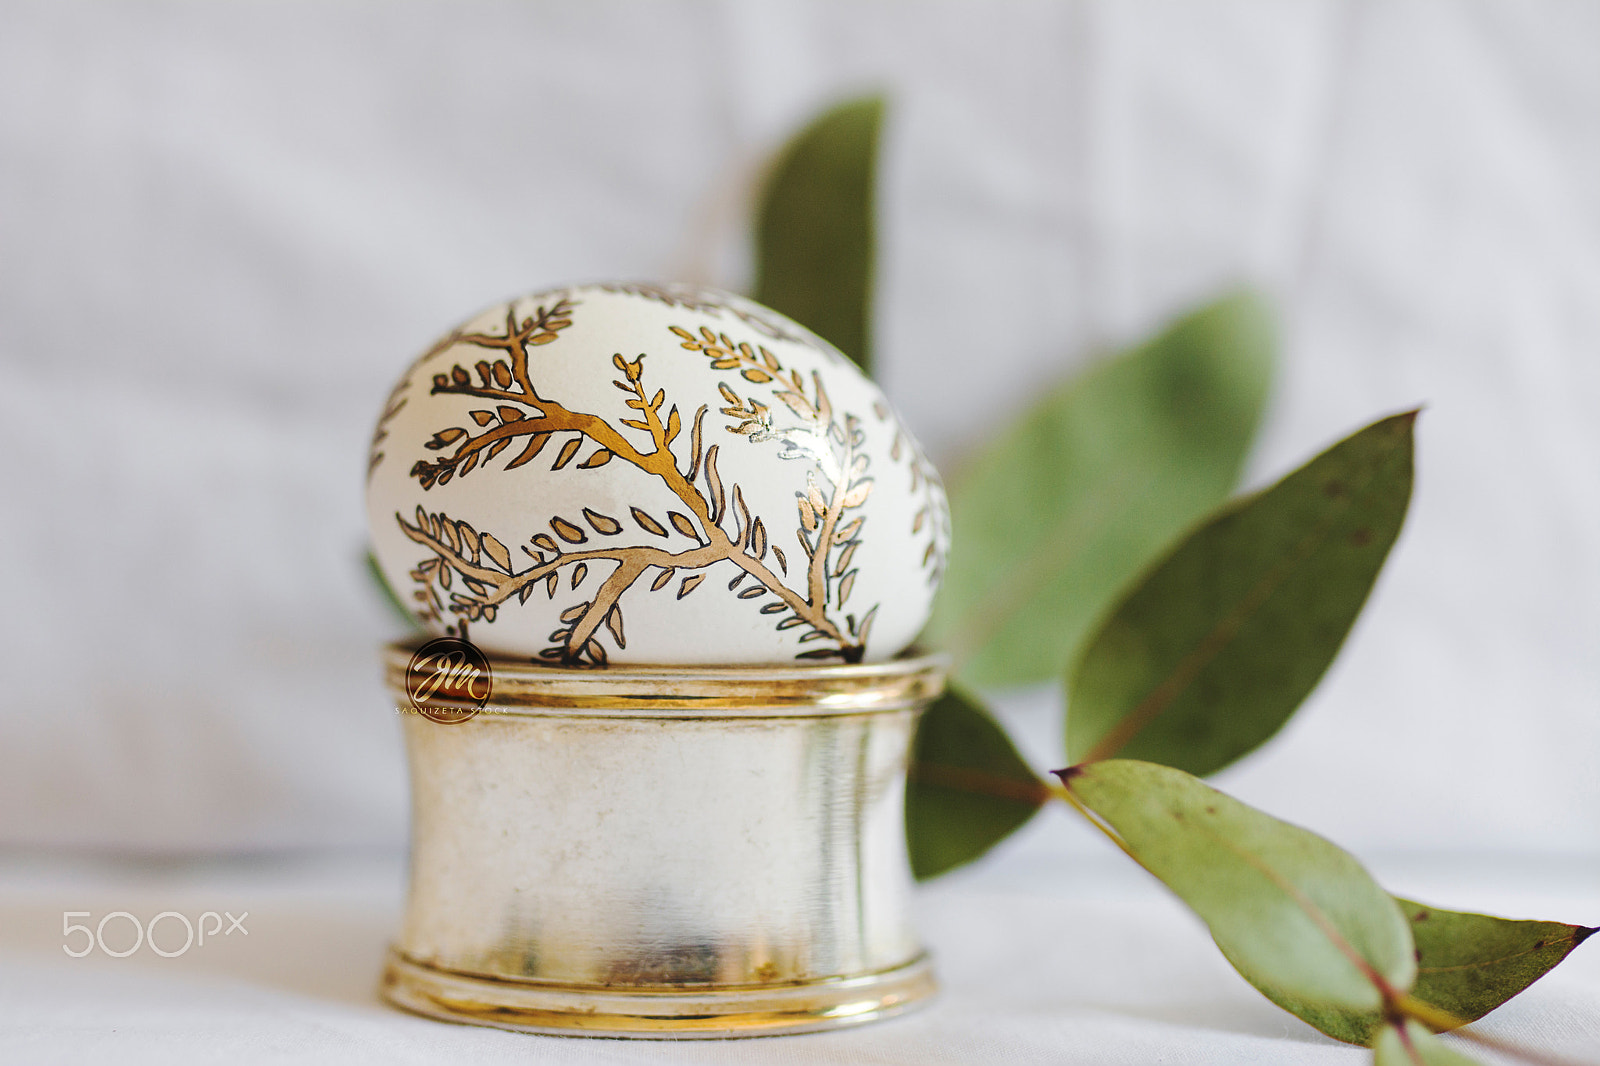 Nikon D7100 + Sigma 35mm F1.4 DG HSM Art sample photo. Easter egg, painted with golden branches on silver container. photography